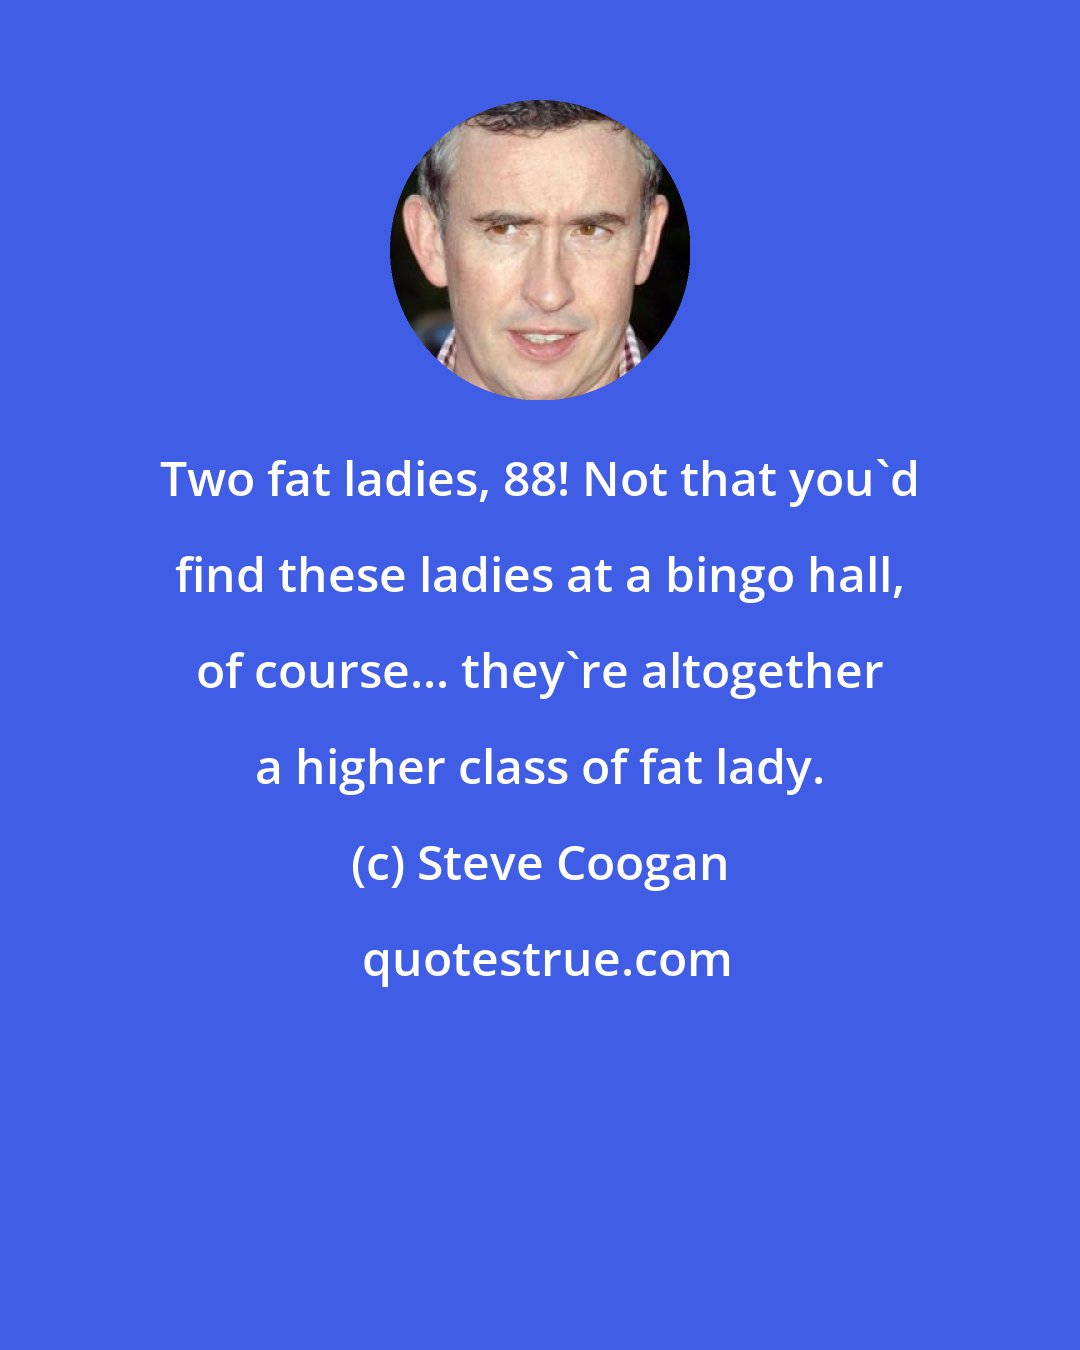 Steve Coogan: Two fat ladies, 88! Not that you'd find these ladies at a bingo hall, of course... they're altogether a higher class of fat lady.